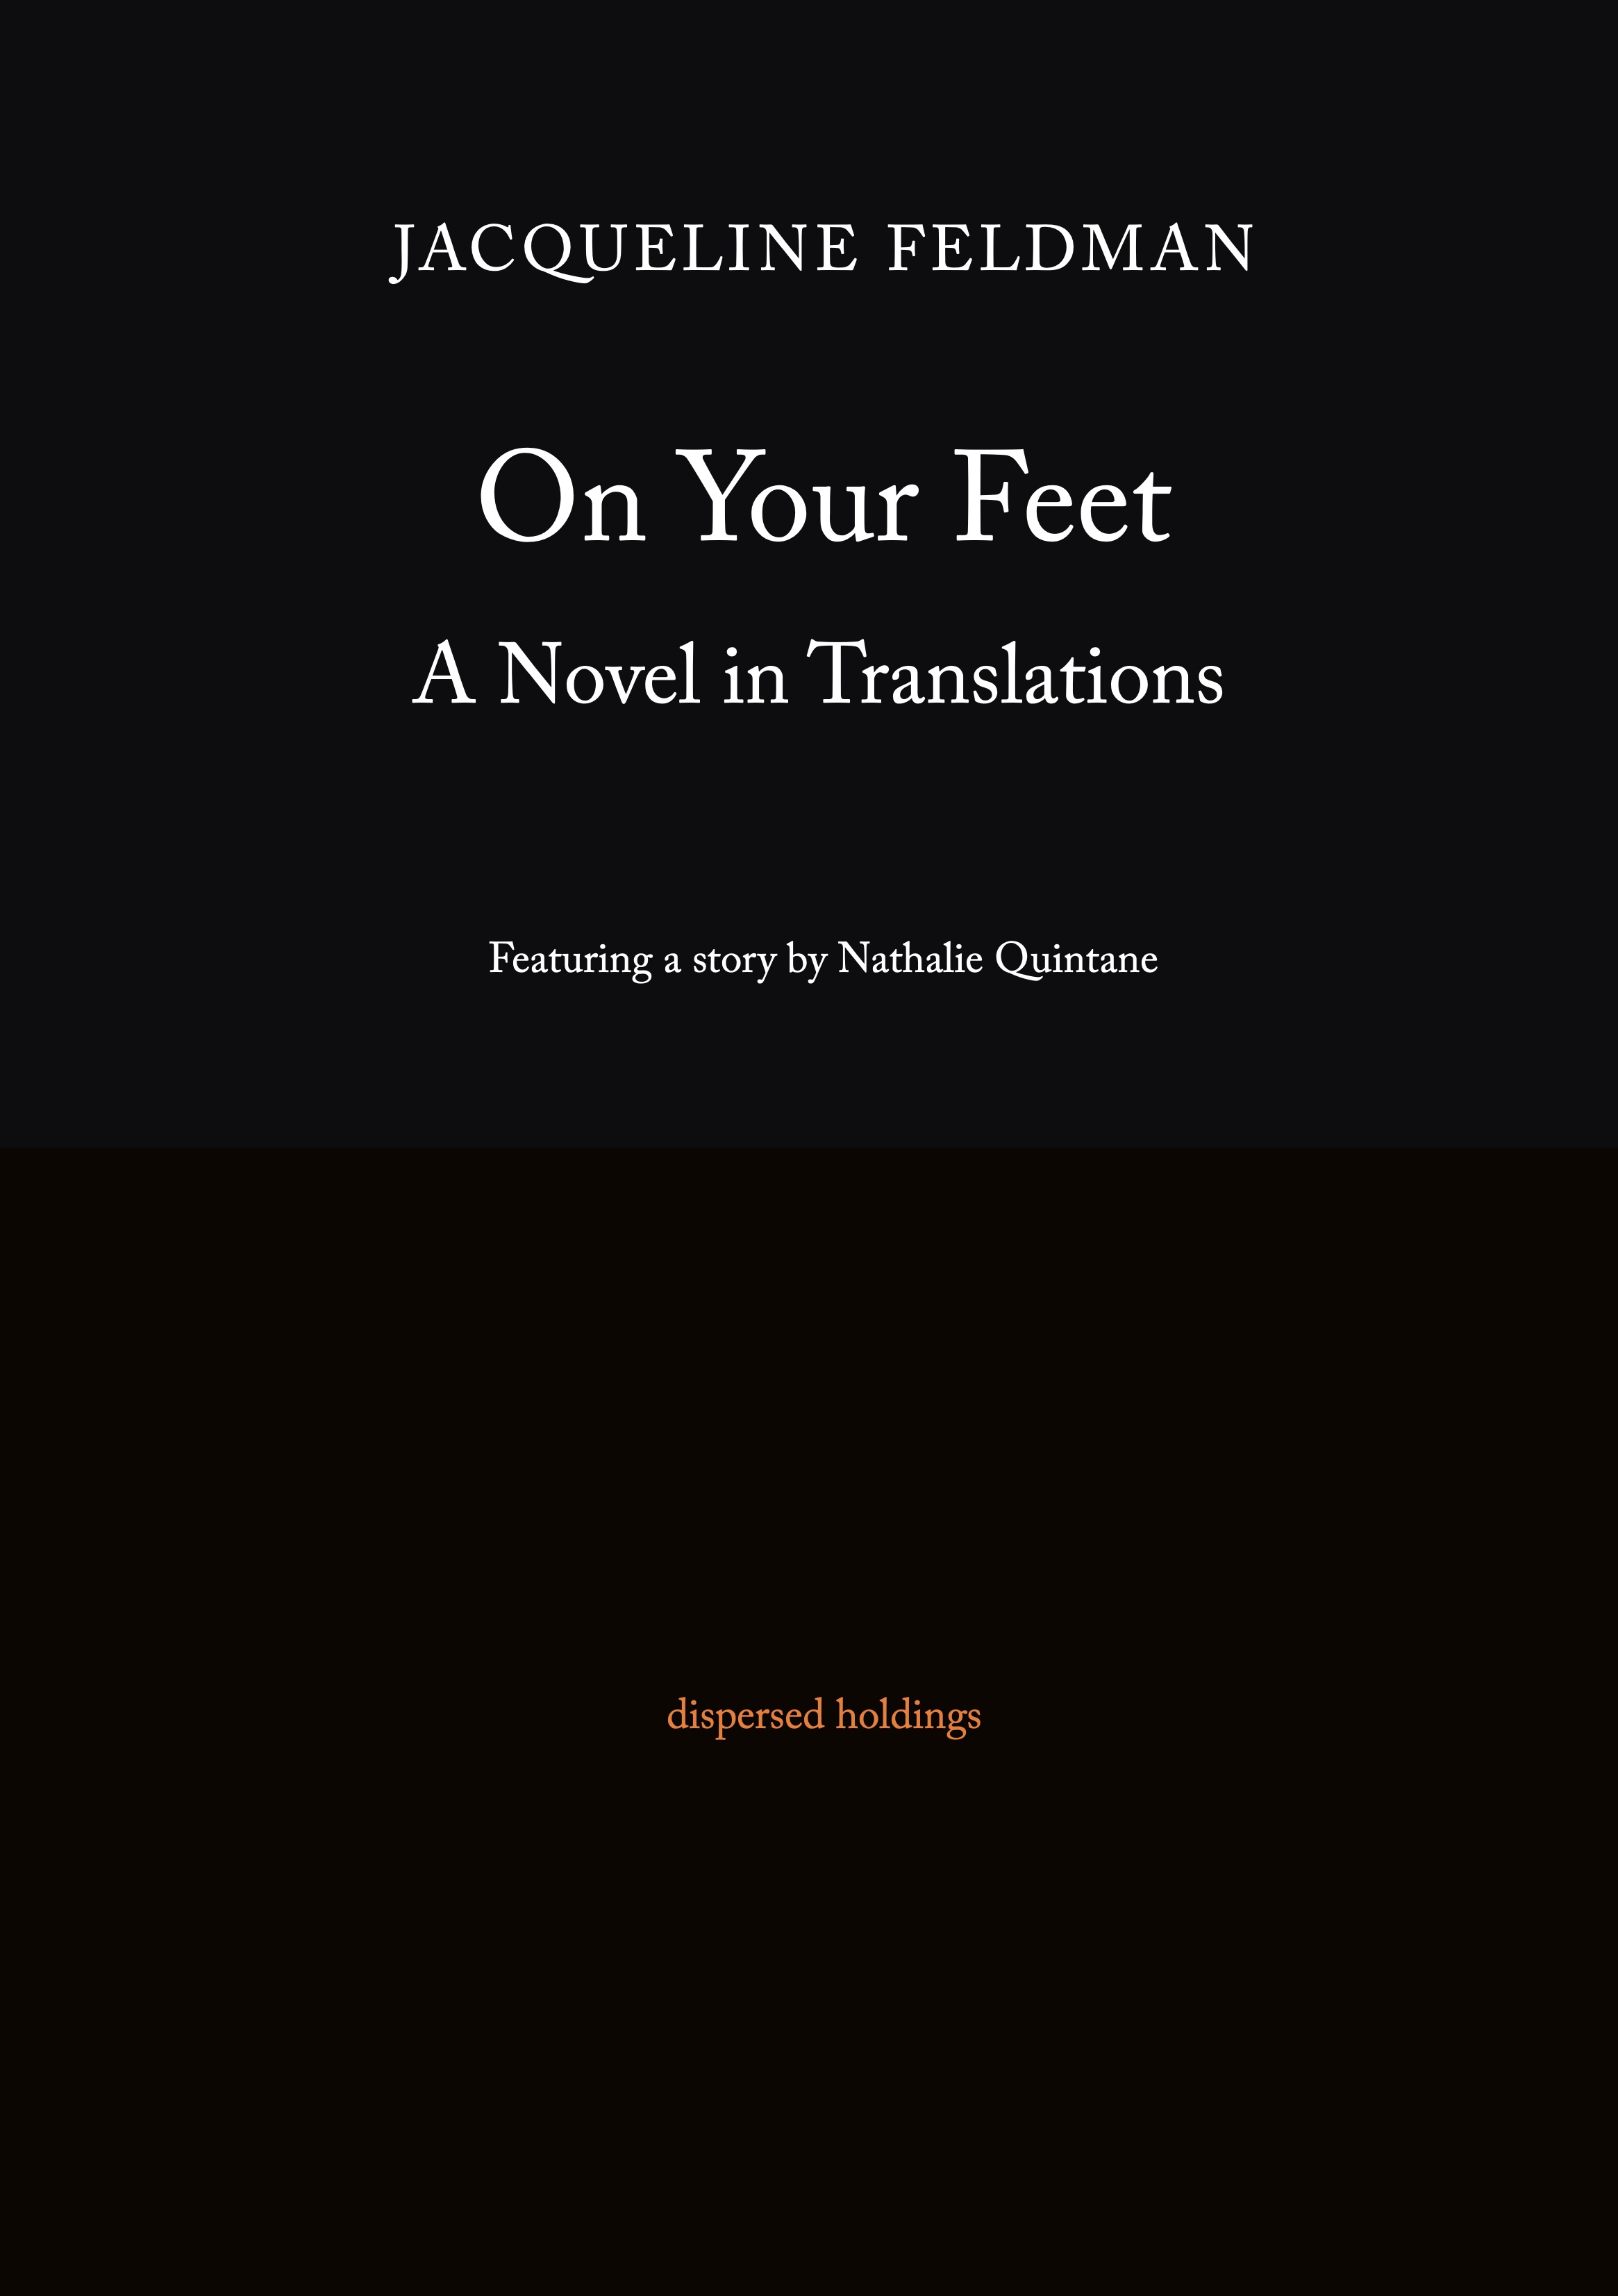  - ON YOUR FEET BOOK LAUNCH with Jacqueline Feldman & Friends